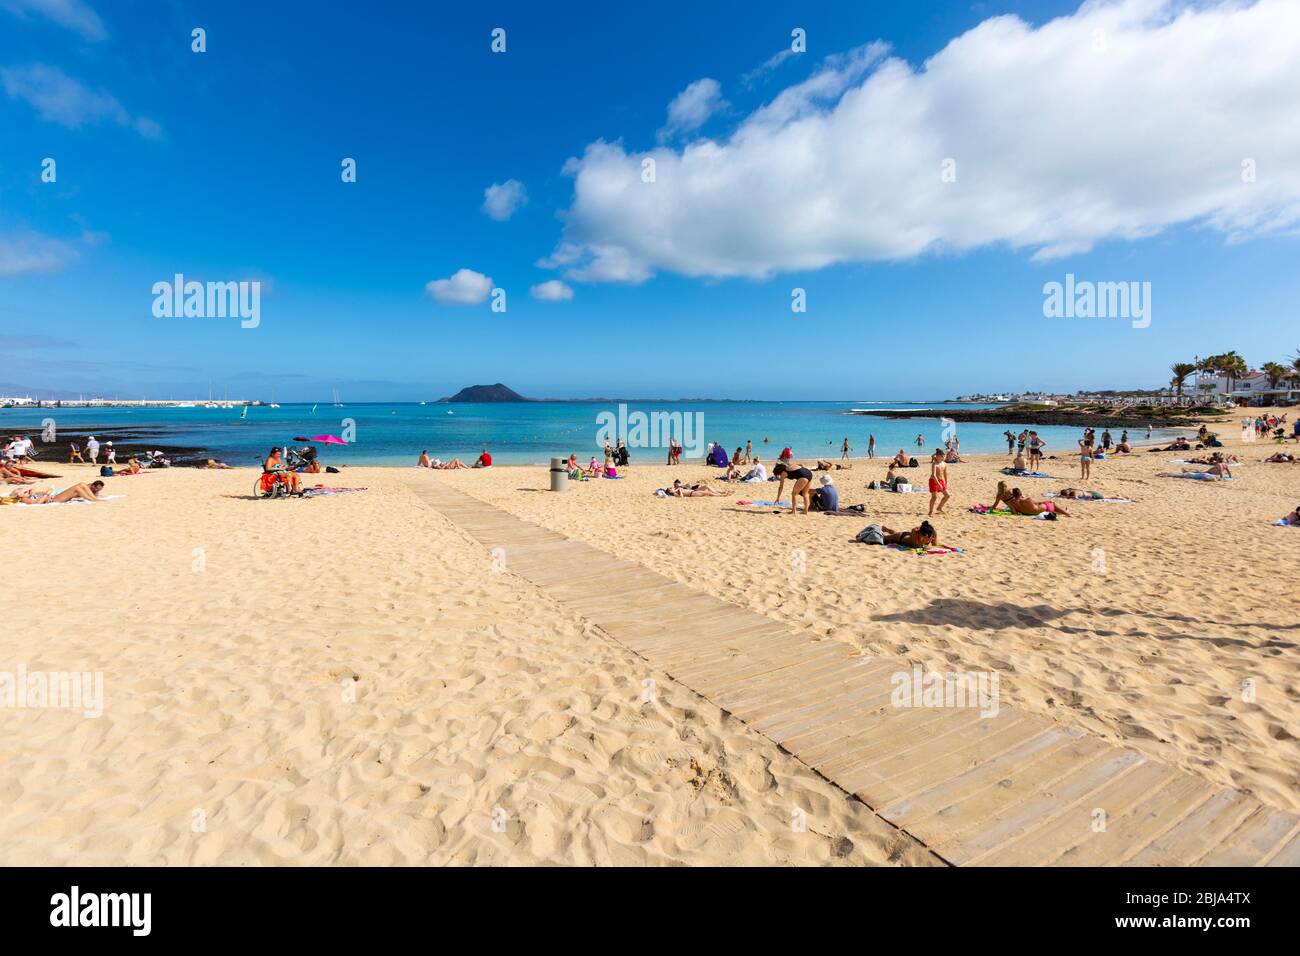 A sunny day with people sunbathing on the sand at Toro Beach, Fuerteventura, Spain Stock Photo